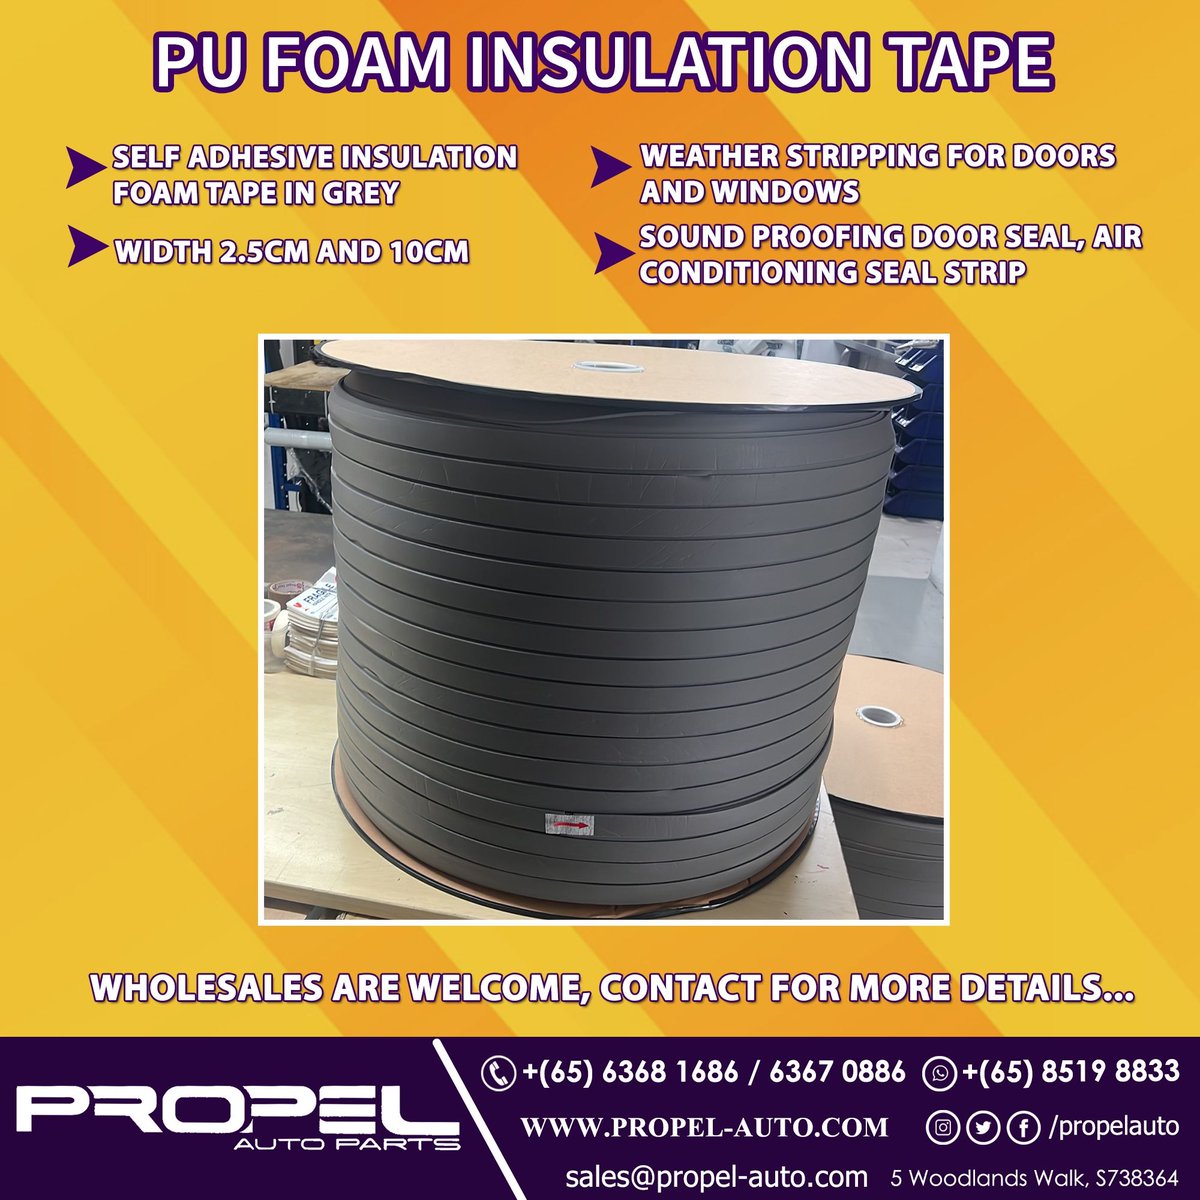 PU Foam Tape #ForSale 

Multi-Purpose Foam Tape Usage: Sound Proofing Seals | Weather Proofing Seals | Cleaning Grease | Absorbing Oil in Floor | Safe Packing Material

Welcome for Bulk (Or) Loose Sales 👇✍️🤳

#PuFoam #ExportQuality #FoamTape #PropelAuto #WarehouseSale #WhatsApp